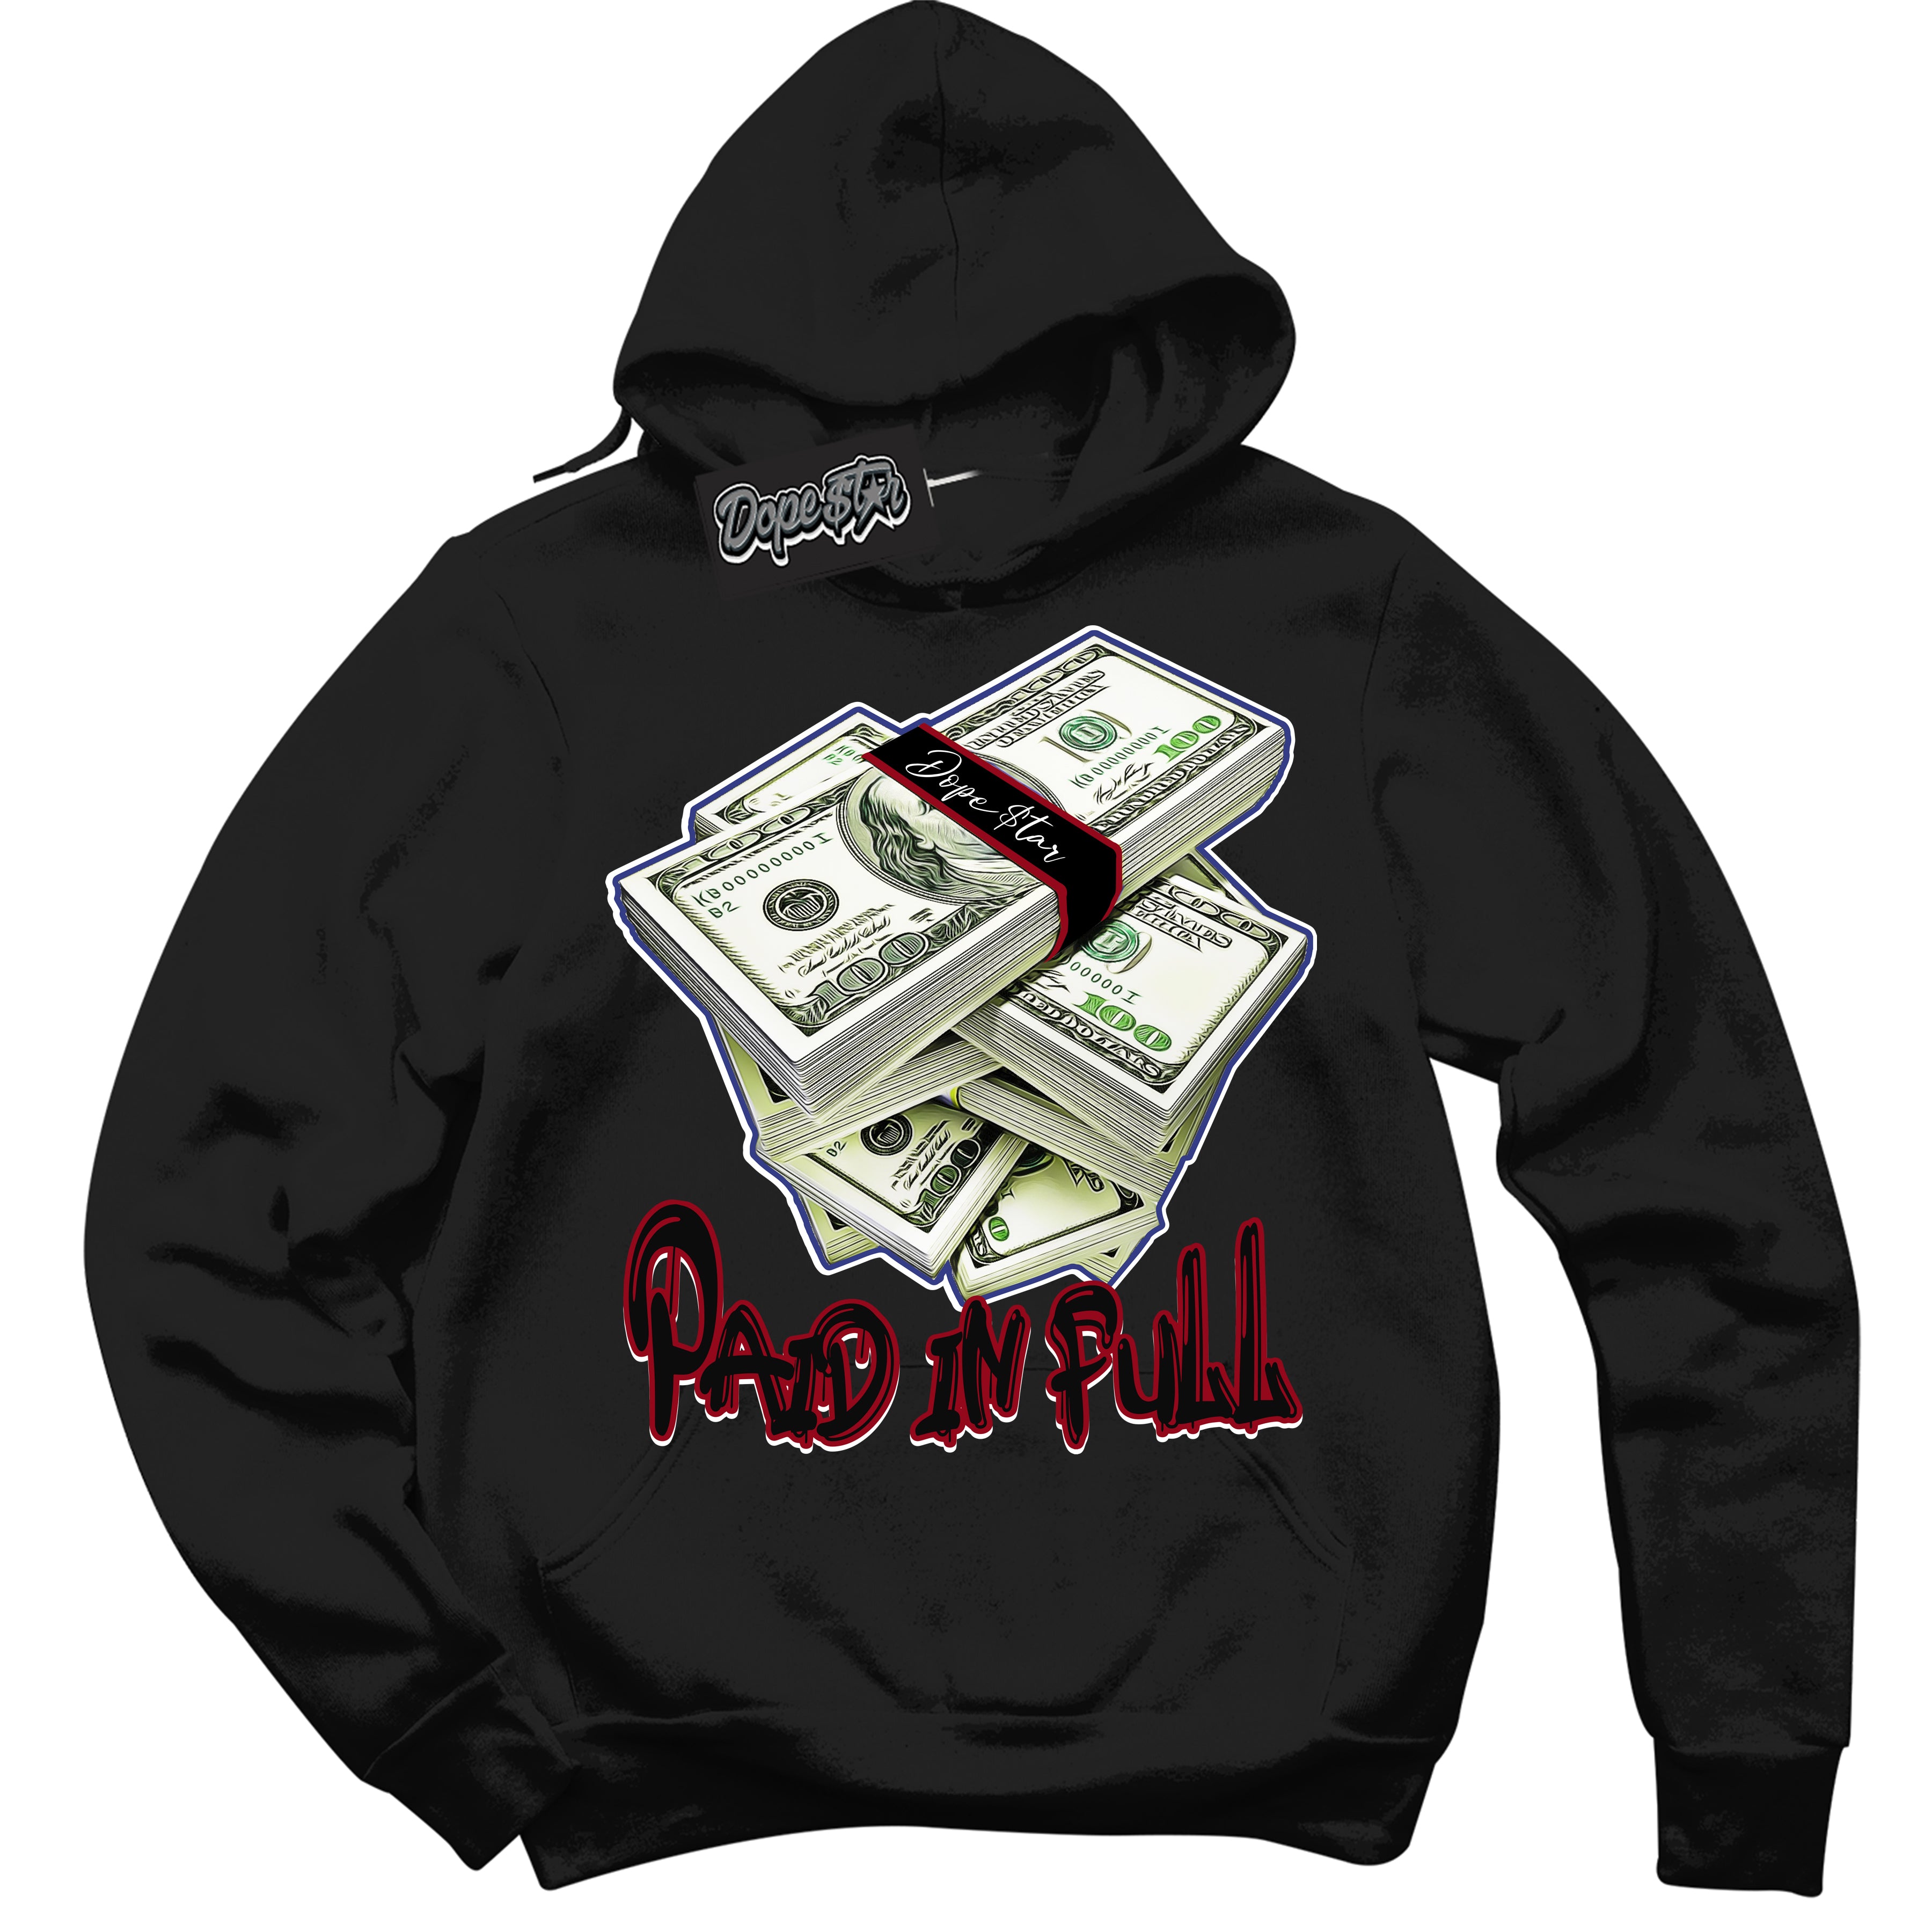 Cool Black Hoodie with “ Paid In Full ”  design that Perfectly Matches Playoffs 8s Sneakers.